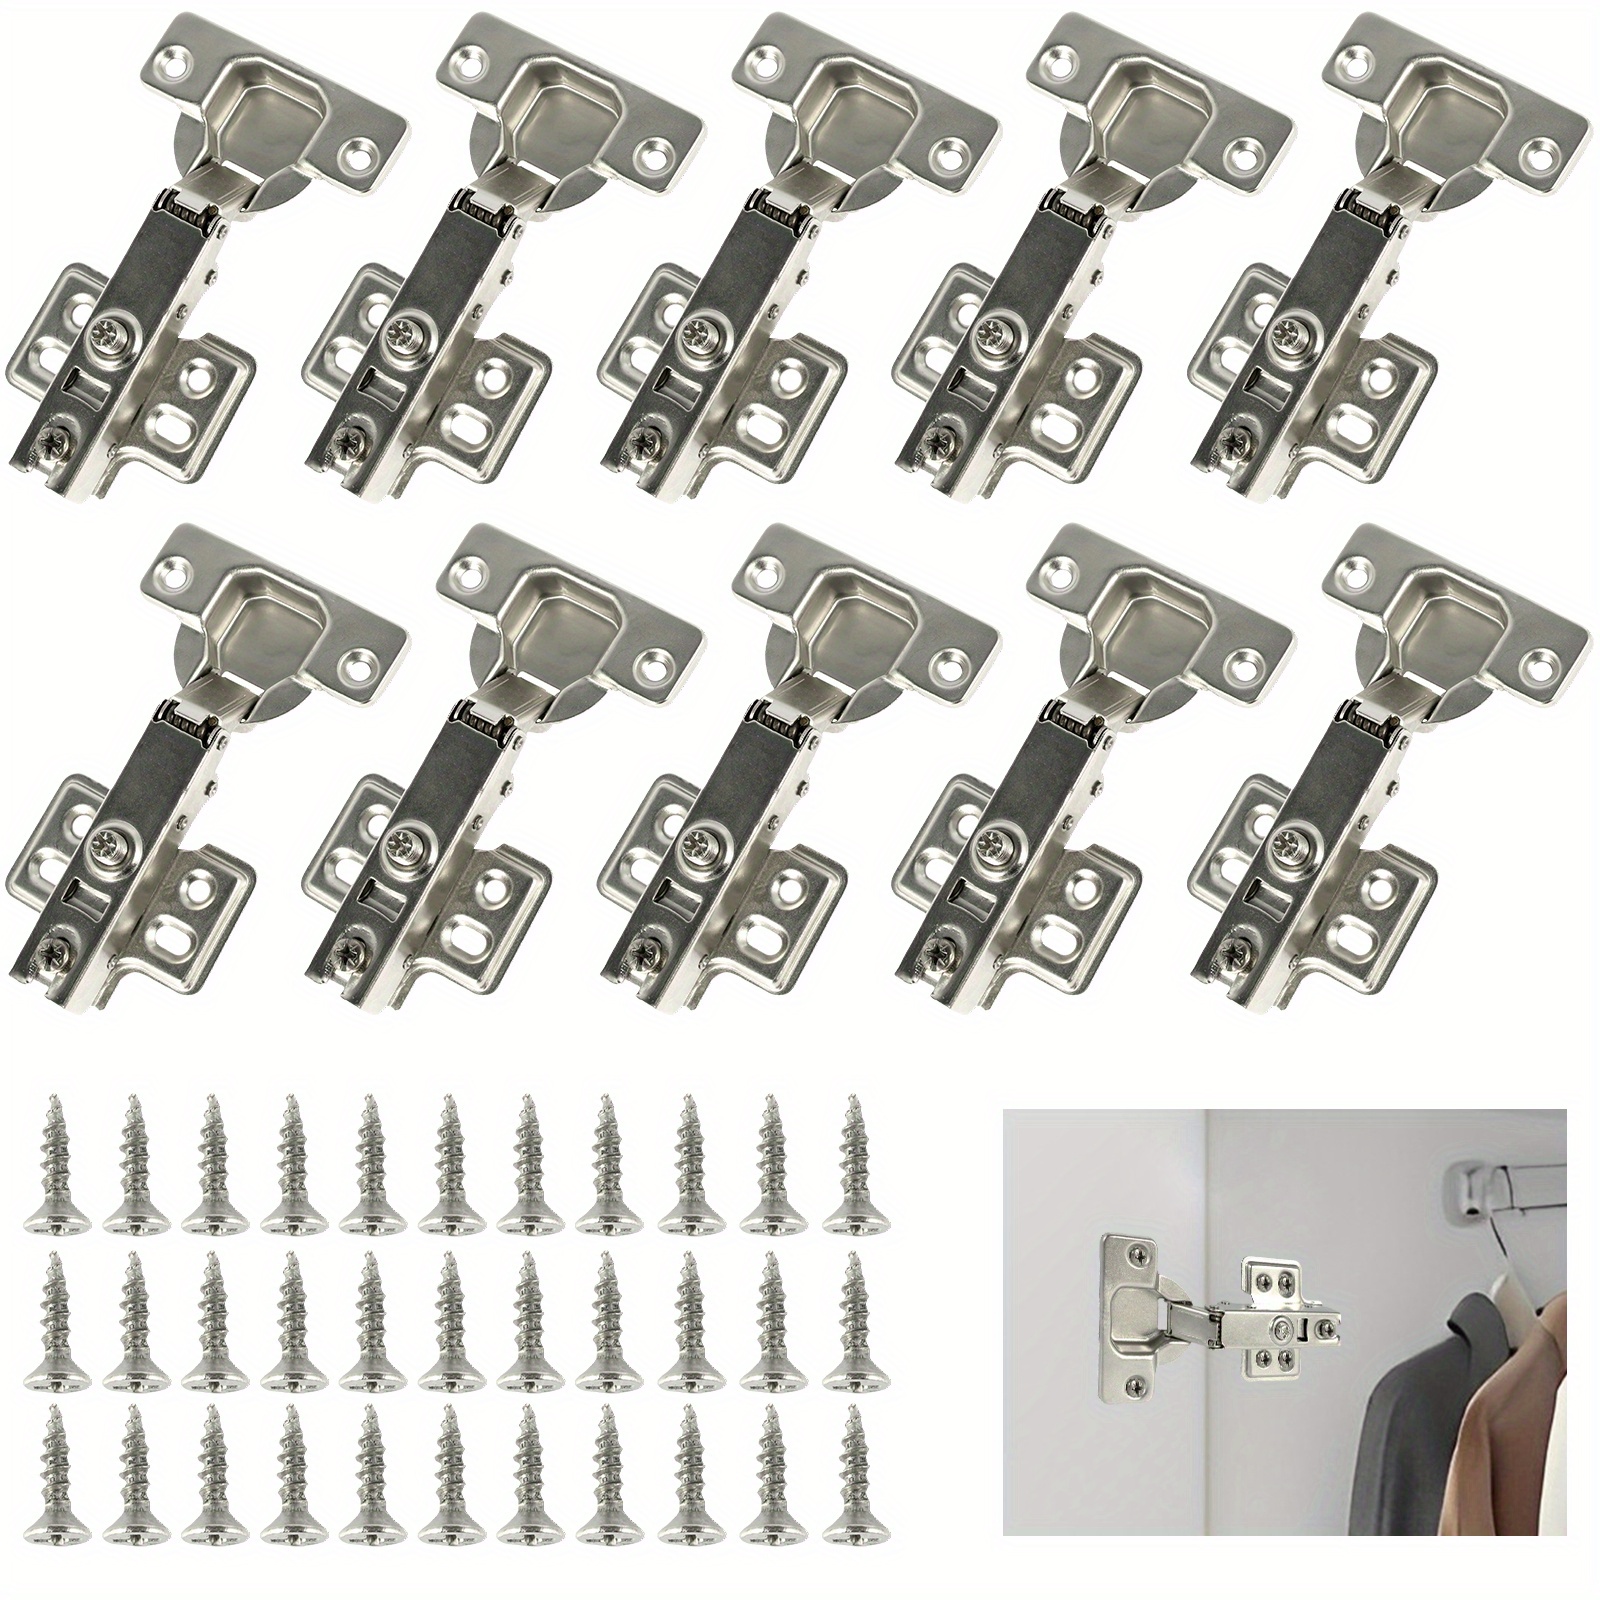 Set Of 4 90 Degree Hinges, Adjustable 90 Degree Cabinet Door Hinge,  Concealed Cabinet Door Hinge, For Full Overlay And Inset Cabinet Doors